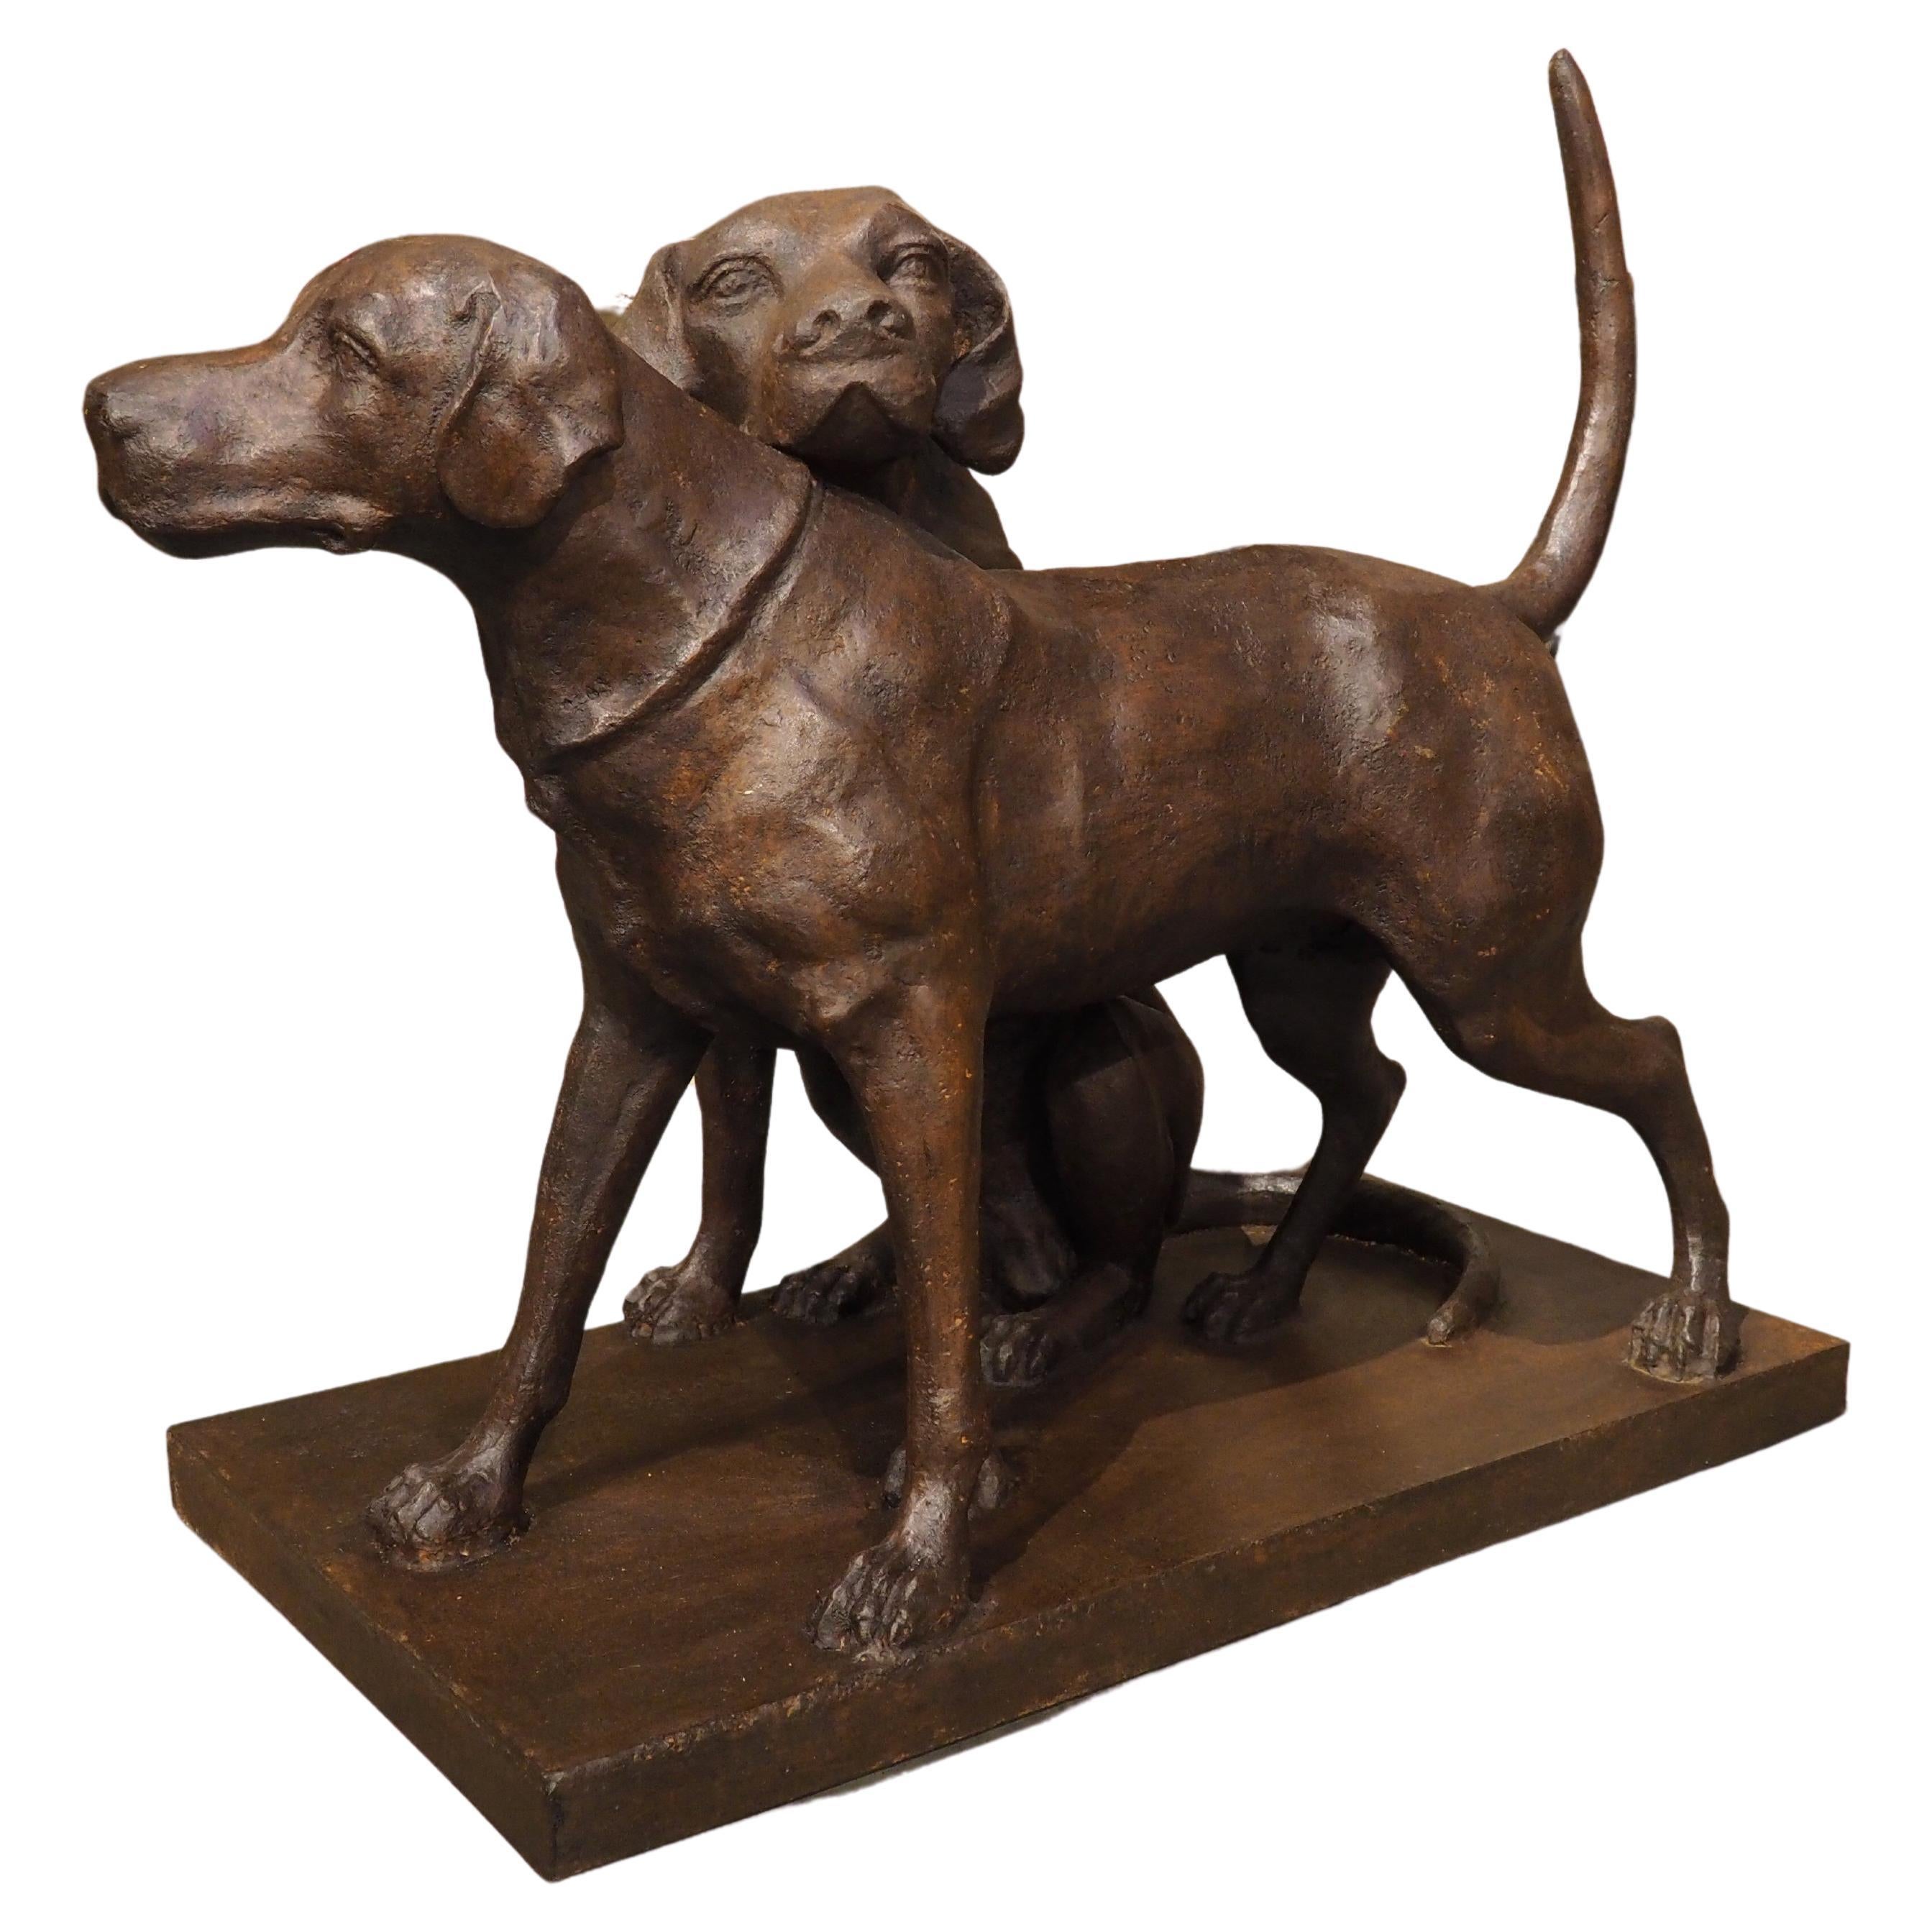 Cast Iron Hunting Dogs Statue, “Seduisant and Lumineau”, after Auguste Cain